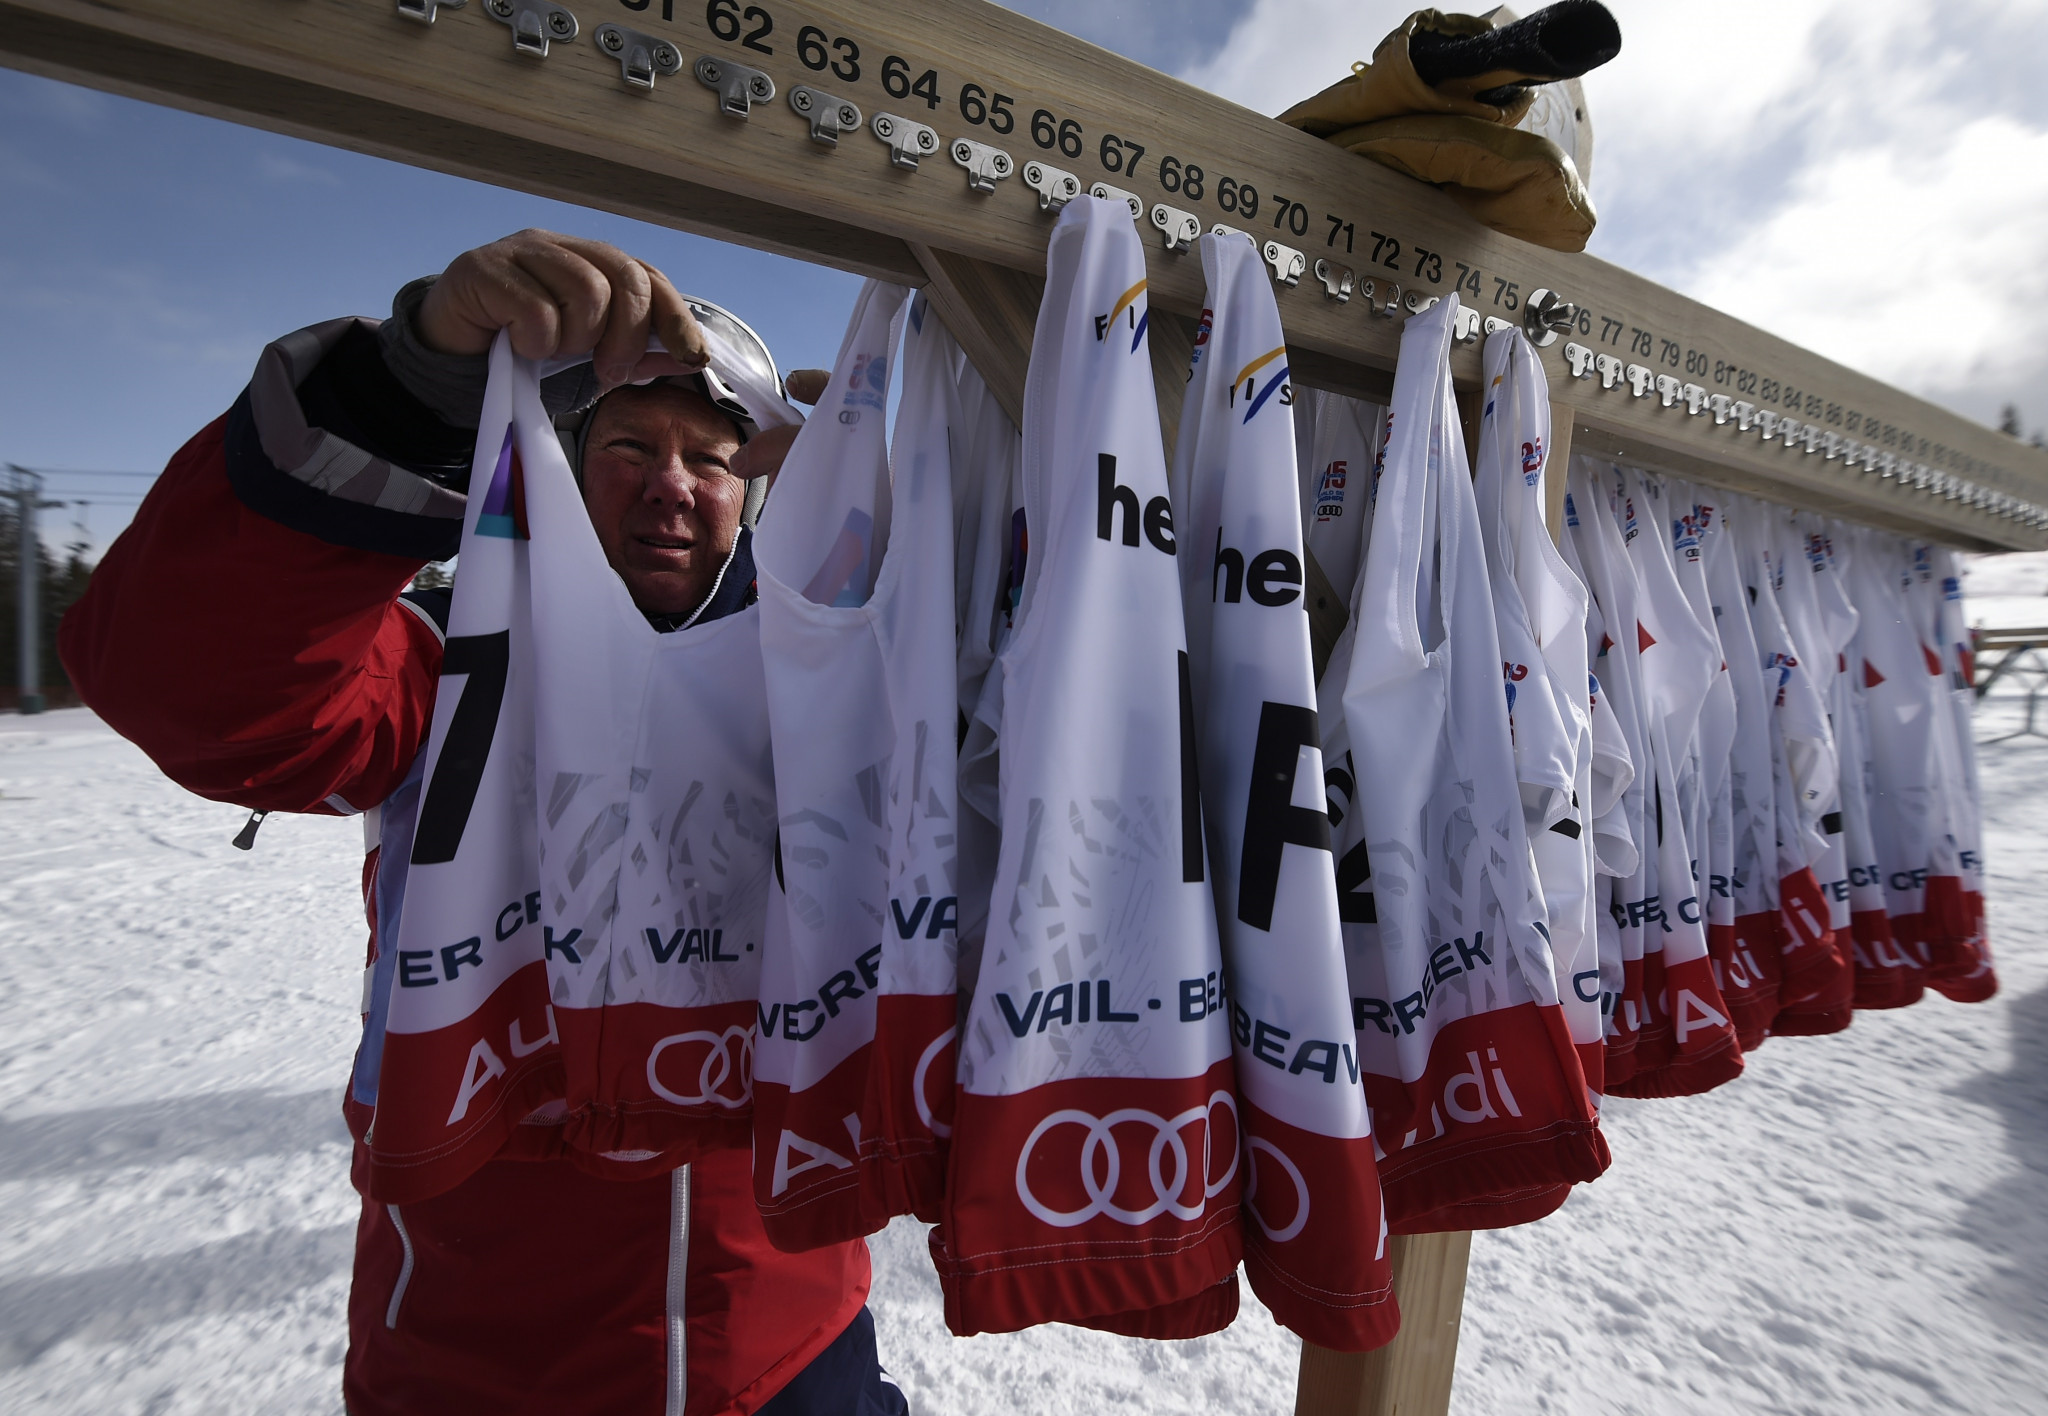 A working group has proposed changes to the drawing of bibs for Alpine skiing events ©Getty Images